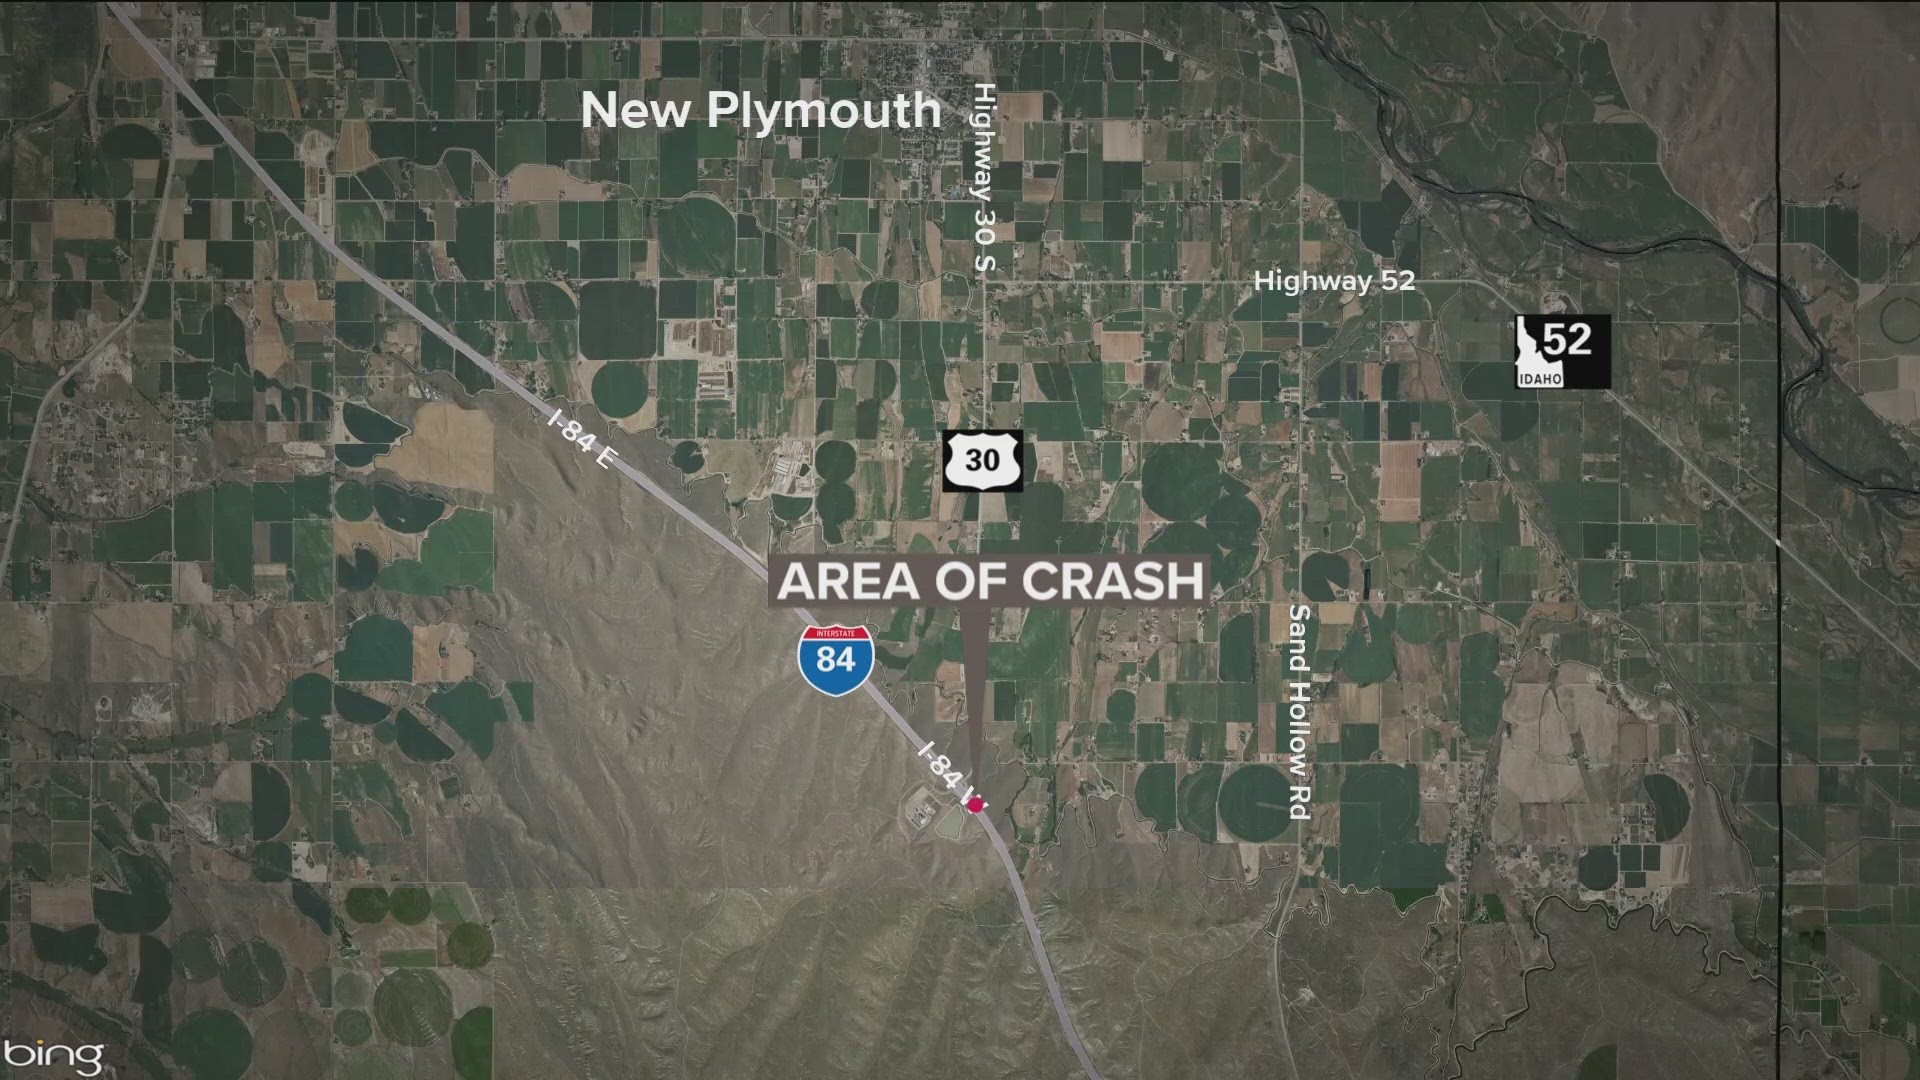 Police said the man was speeding on I-84 when he lost control on the New Plymouth exit.